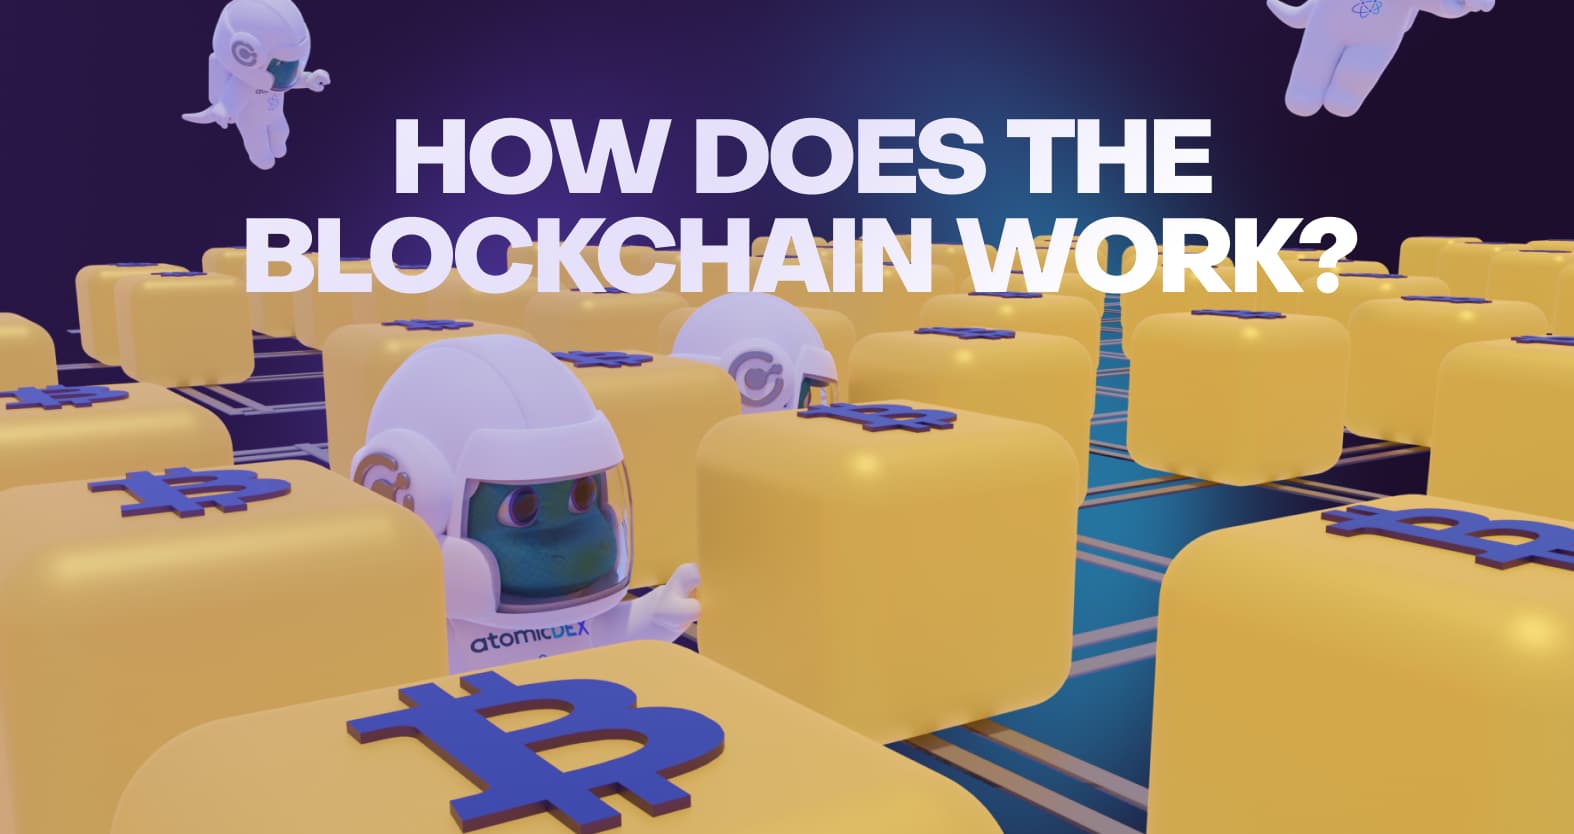 How Does the Blockchain Work?